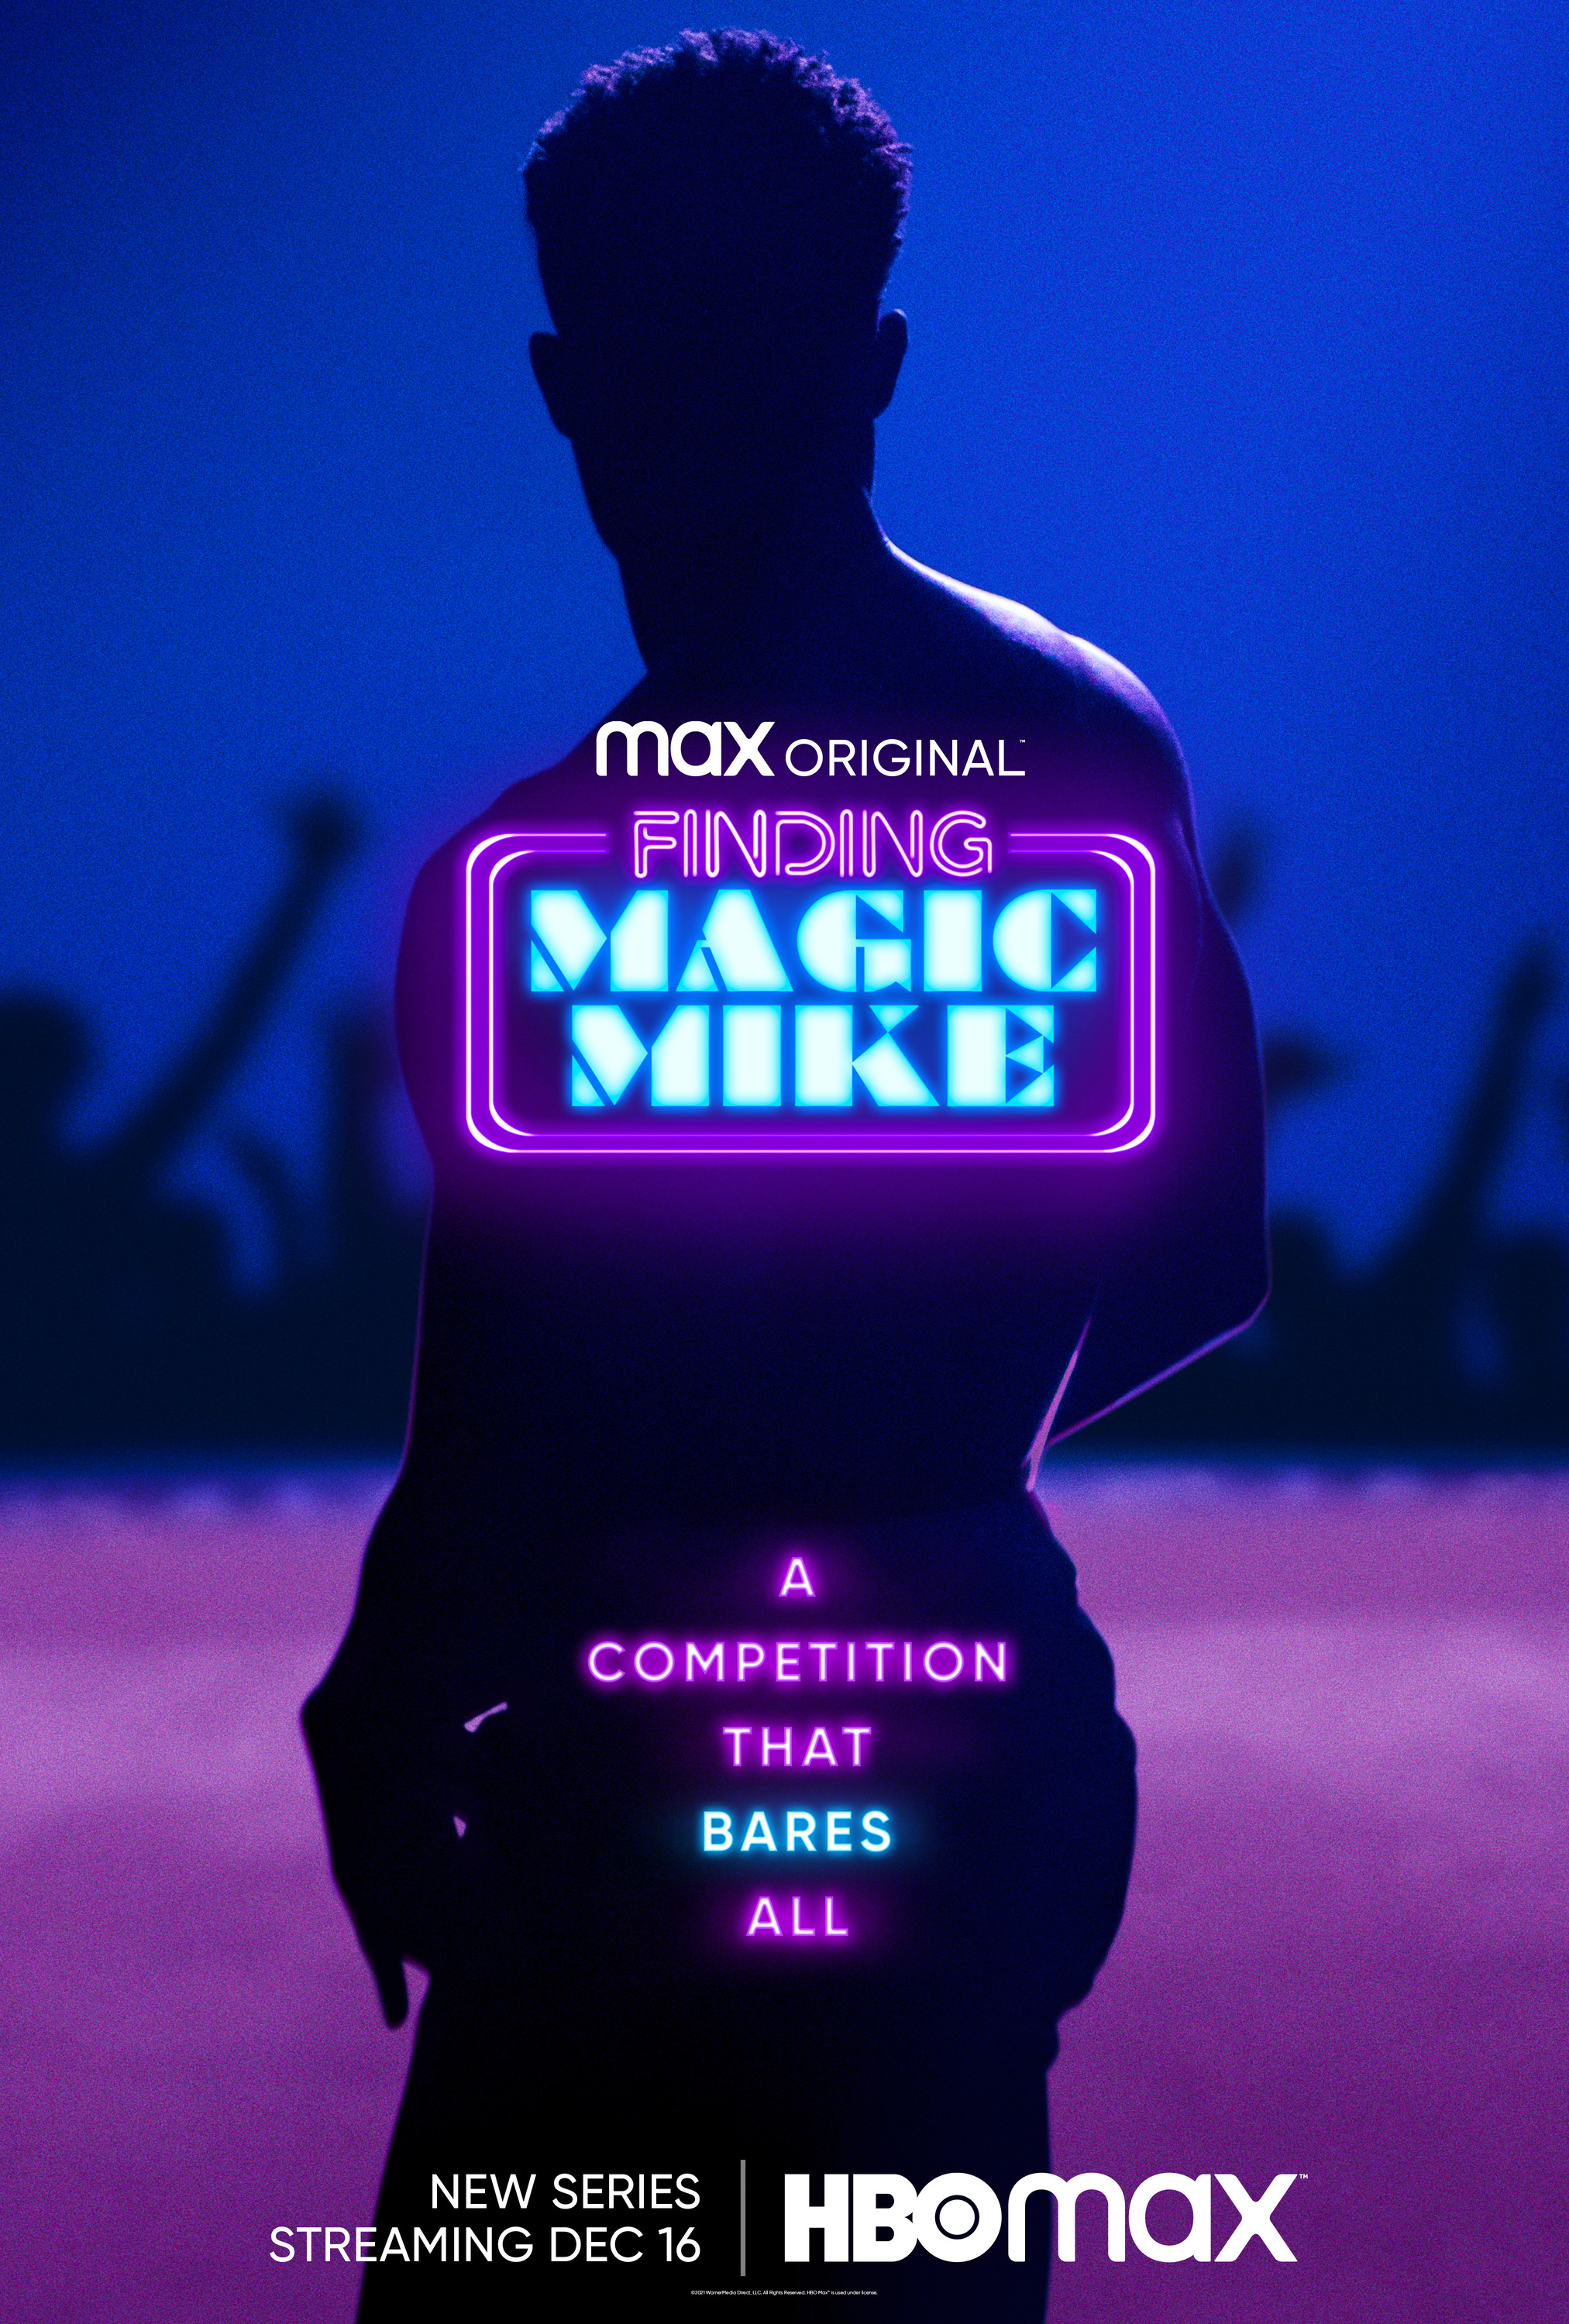 Mega Sized TV Poster Image for Finding Magic Mike 